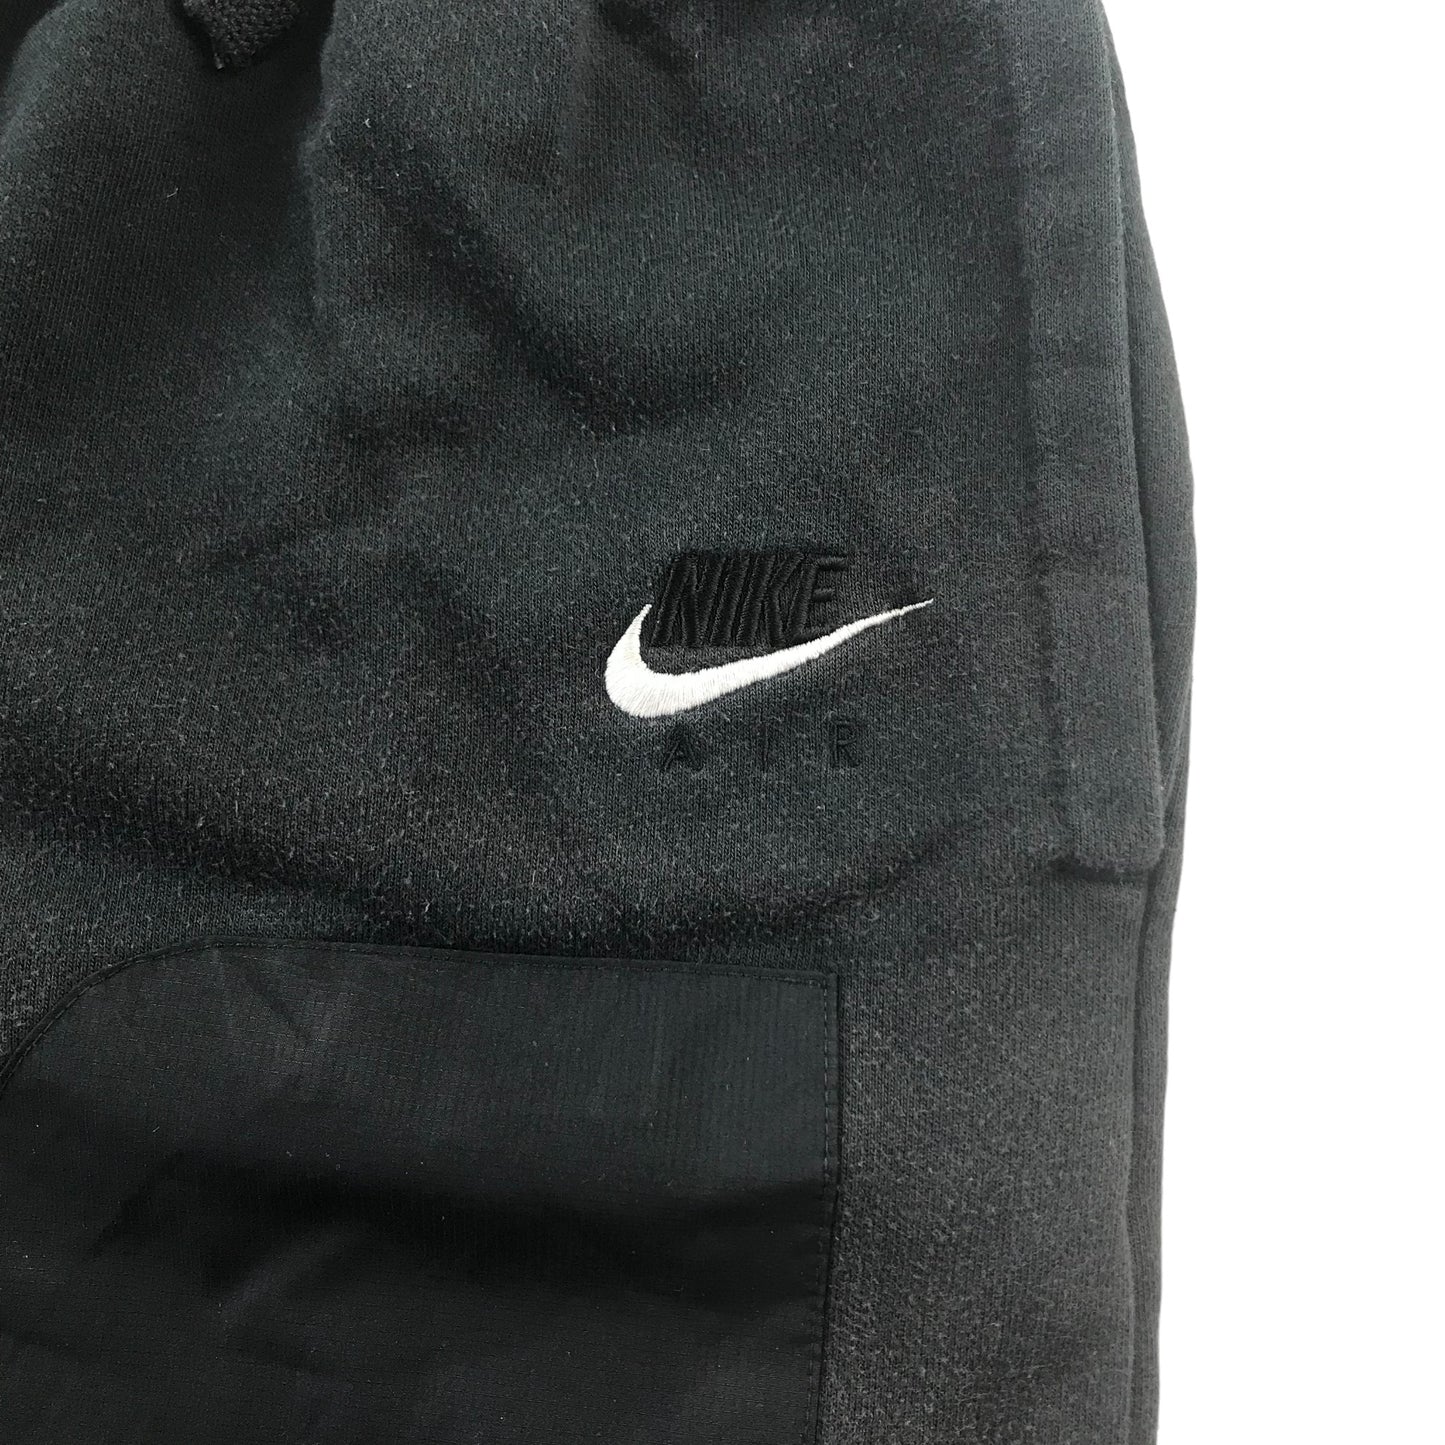 Nike Sports Jersey Shorts Age 12-14 Charcoal with Black Pockets and White Nike Logo